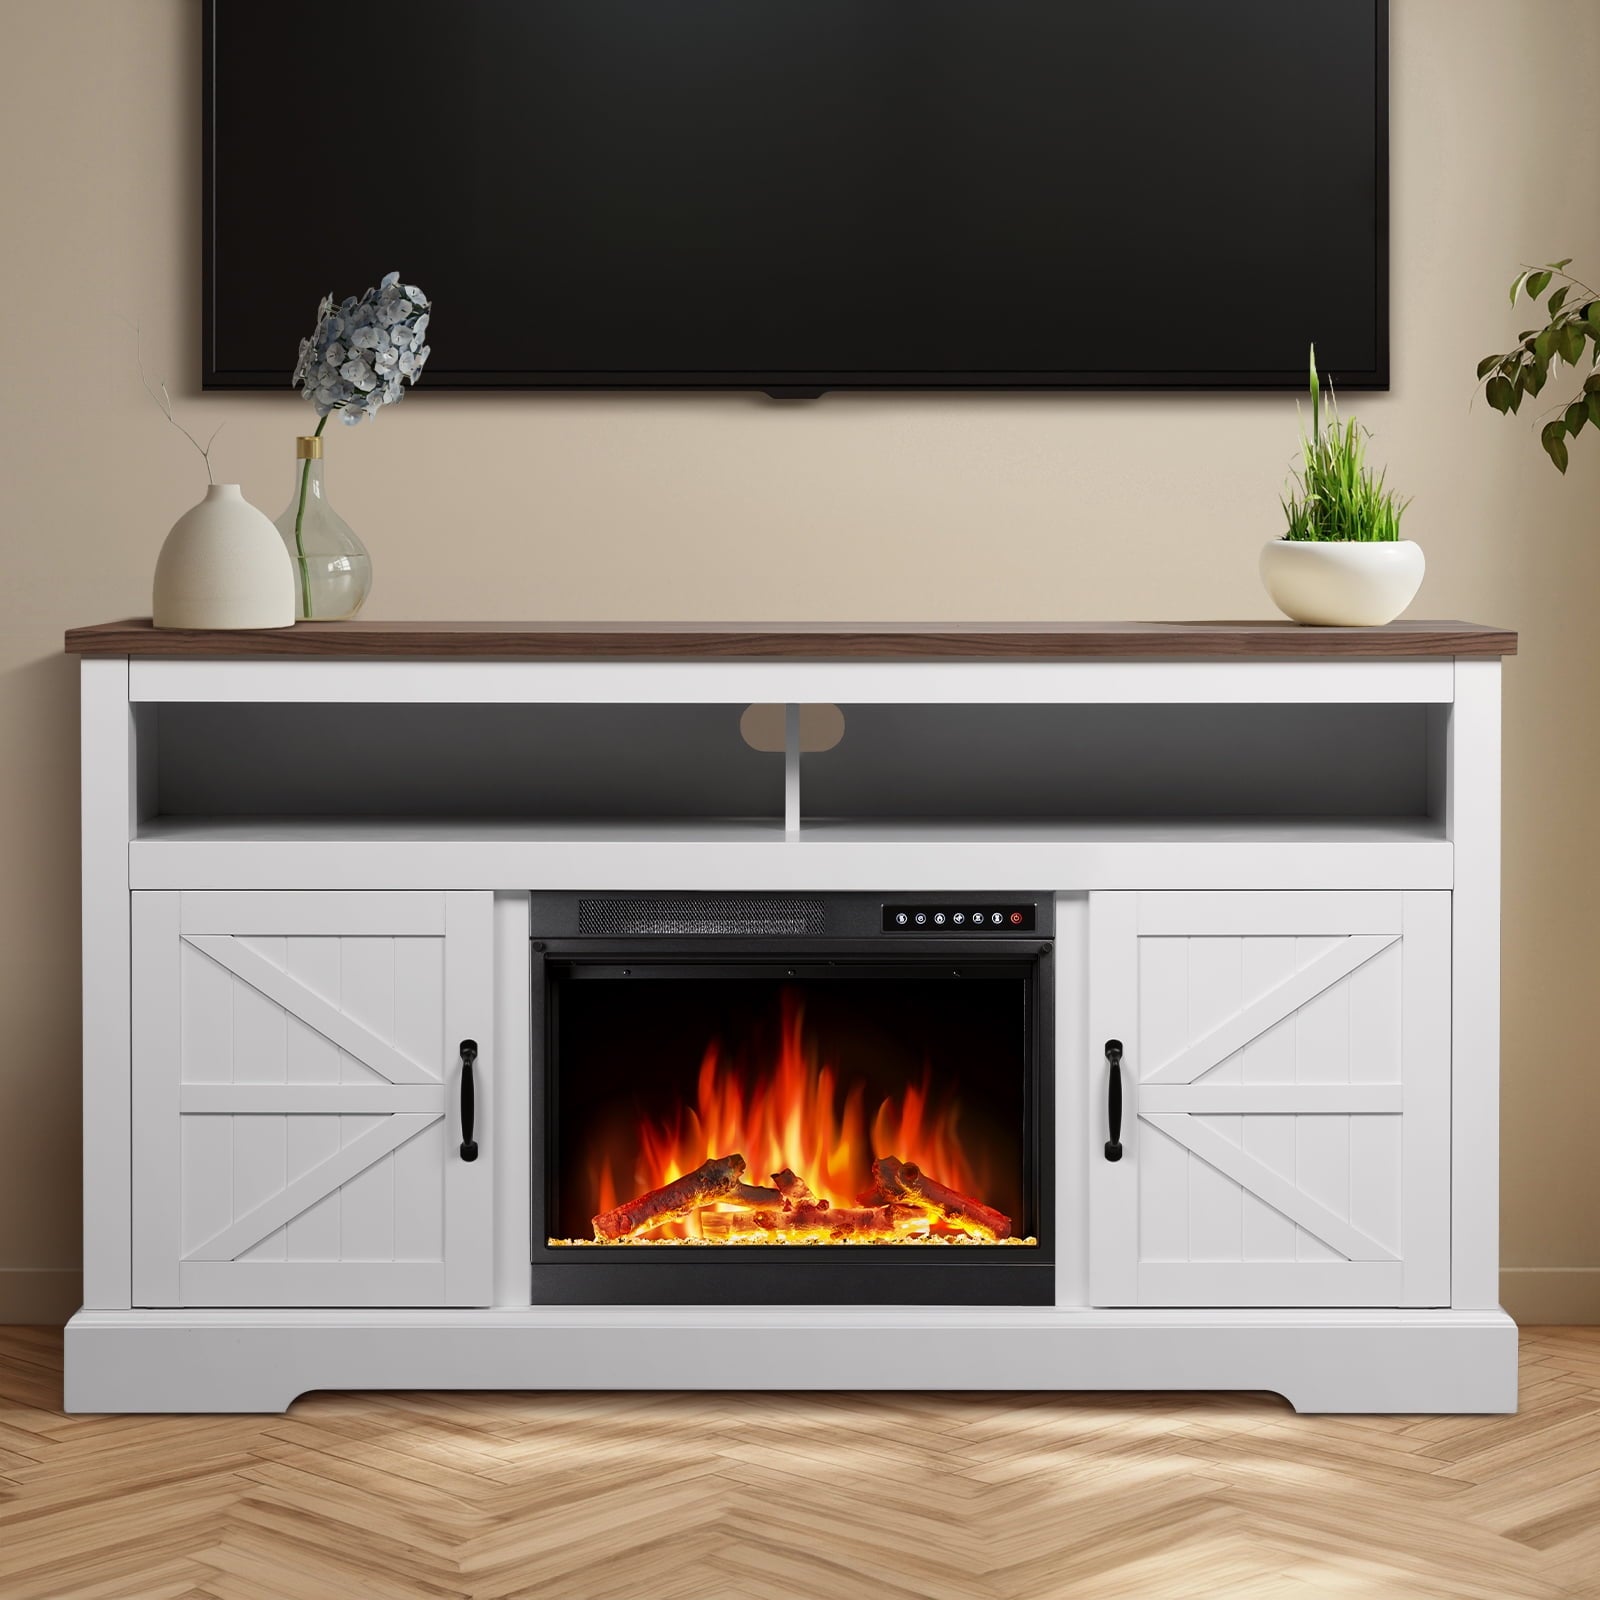 R.W.FLAME 60" Electric Fireplace Mantel with Remote, Adjustable LED Flame, 750W/1500W (White)